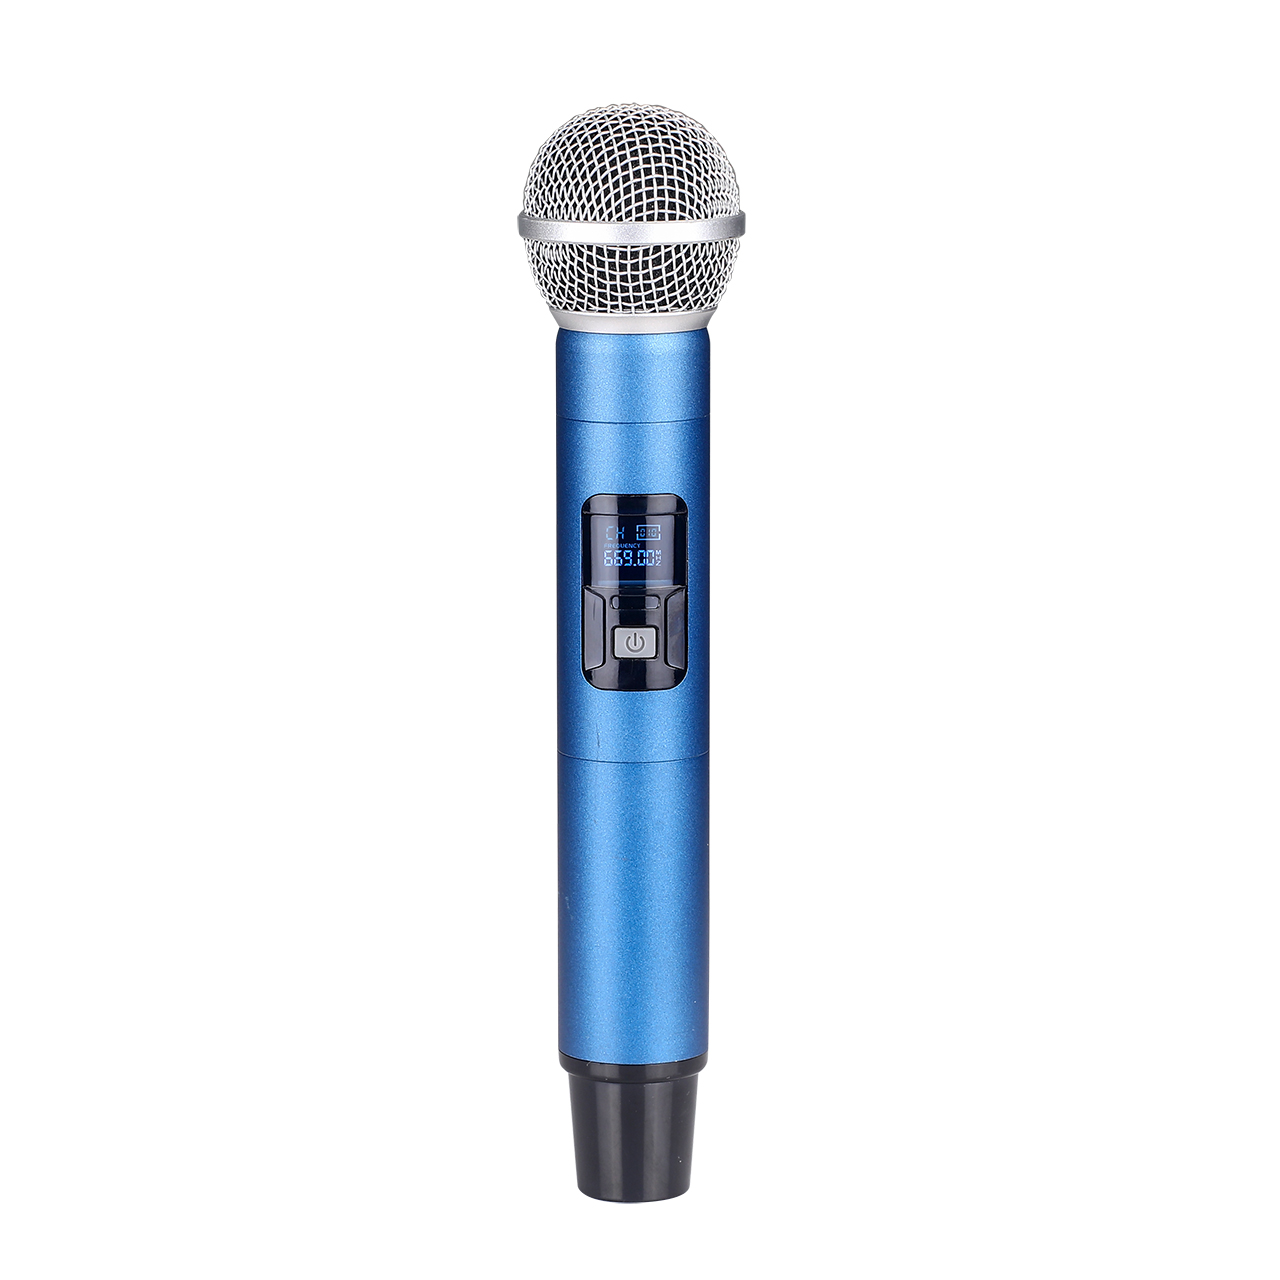 New Wire Microphone AY-608 Offers High-Quality Sound for Professional Applications